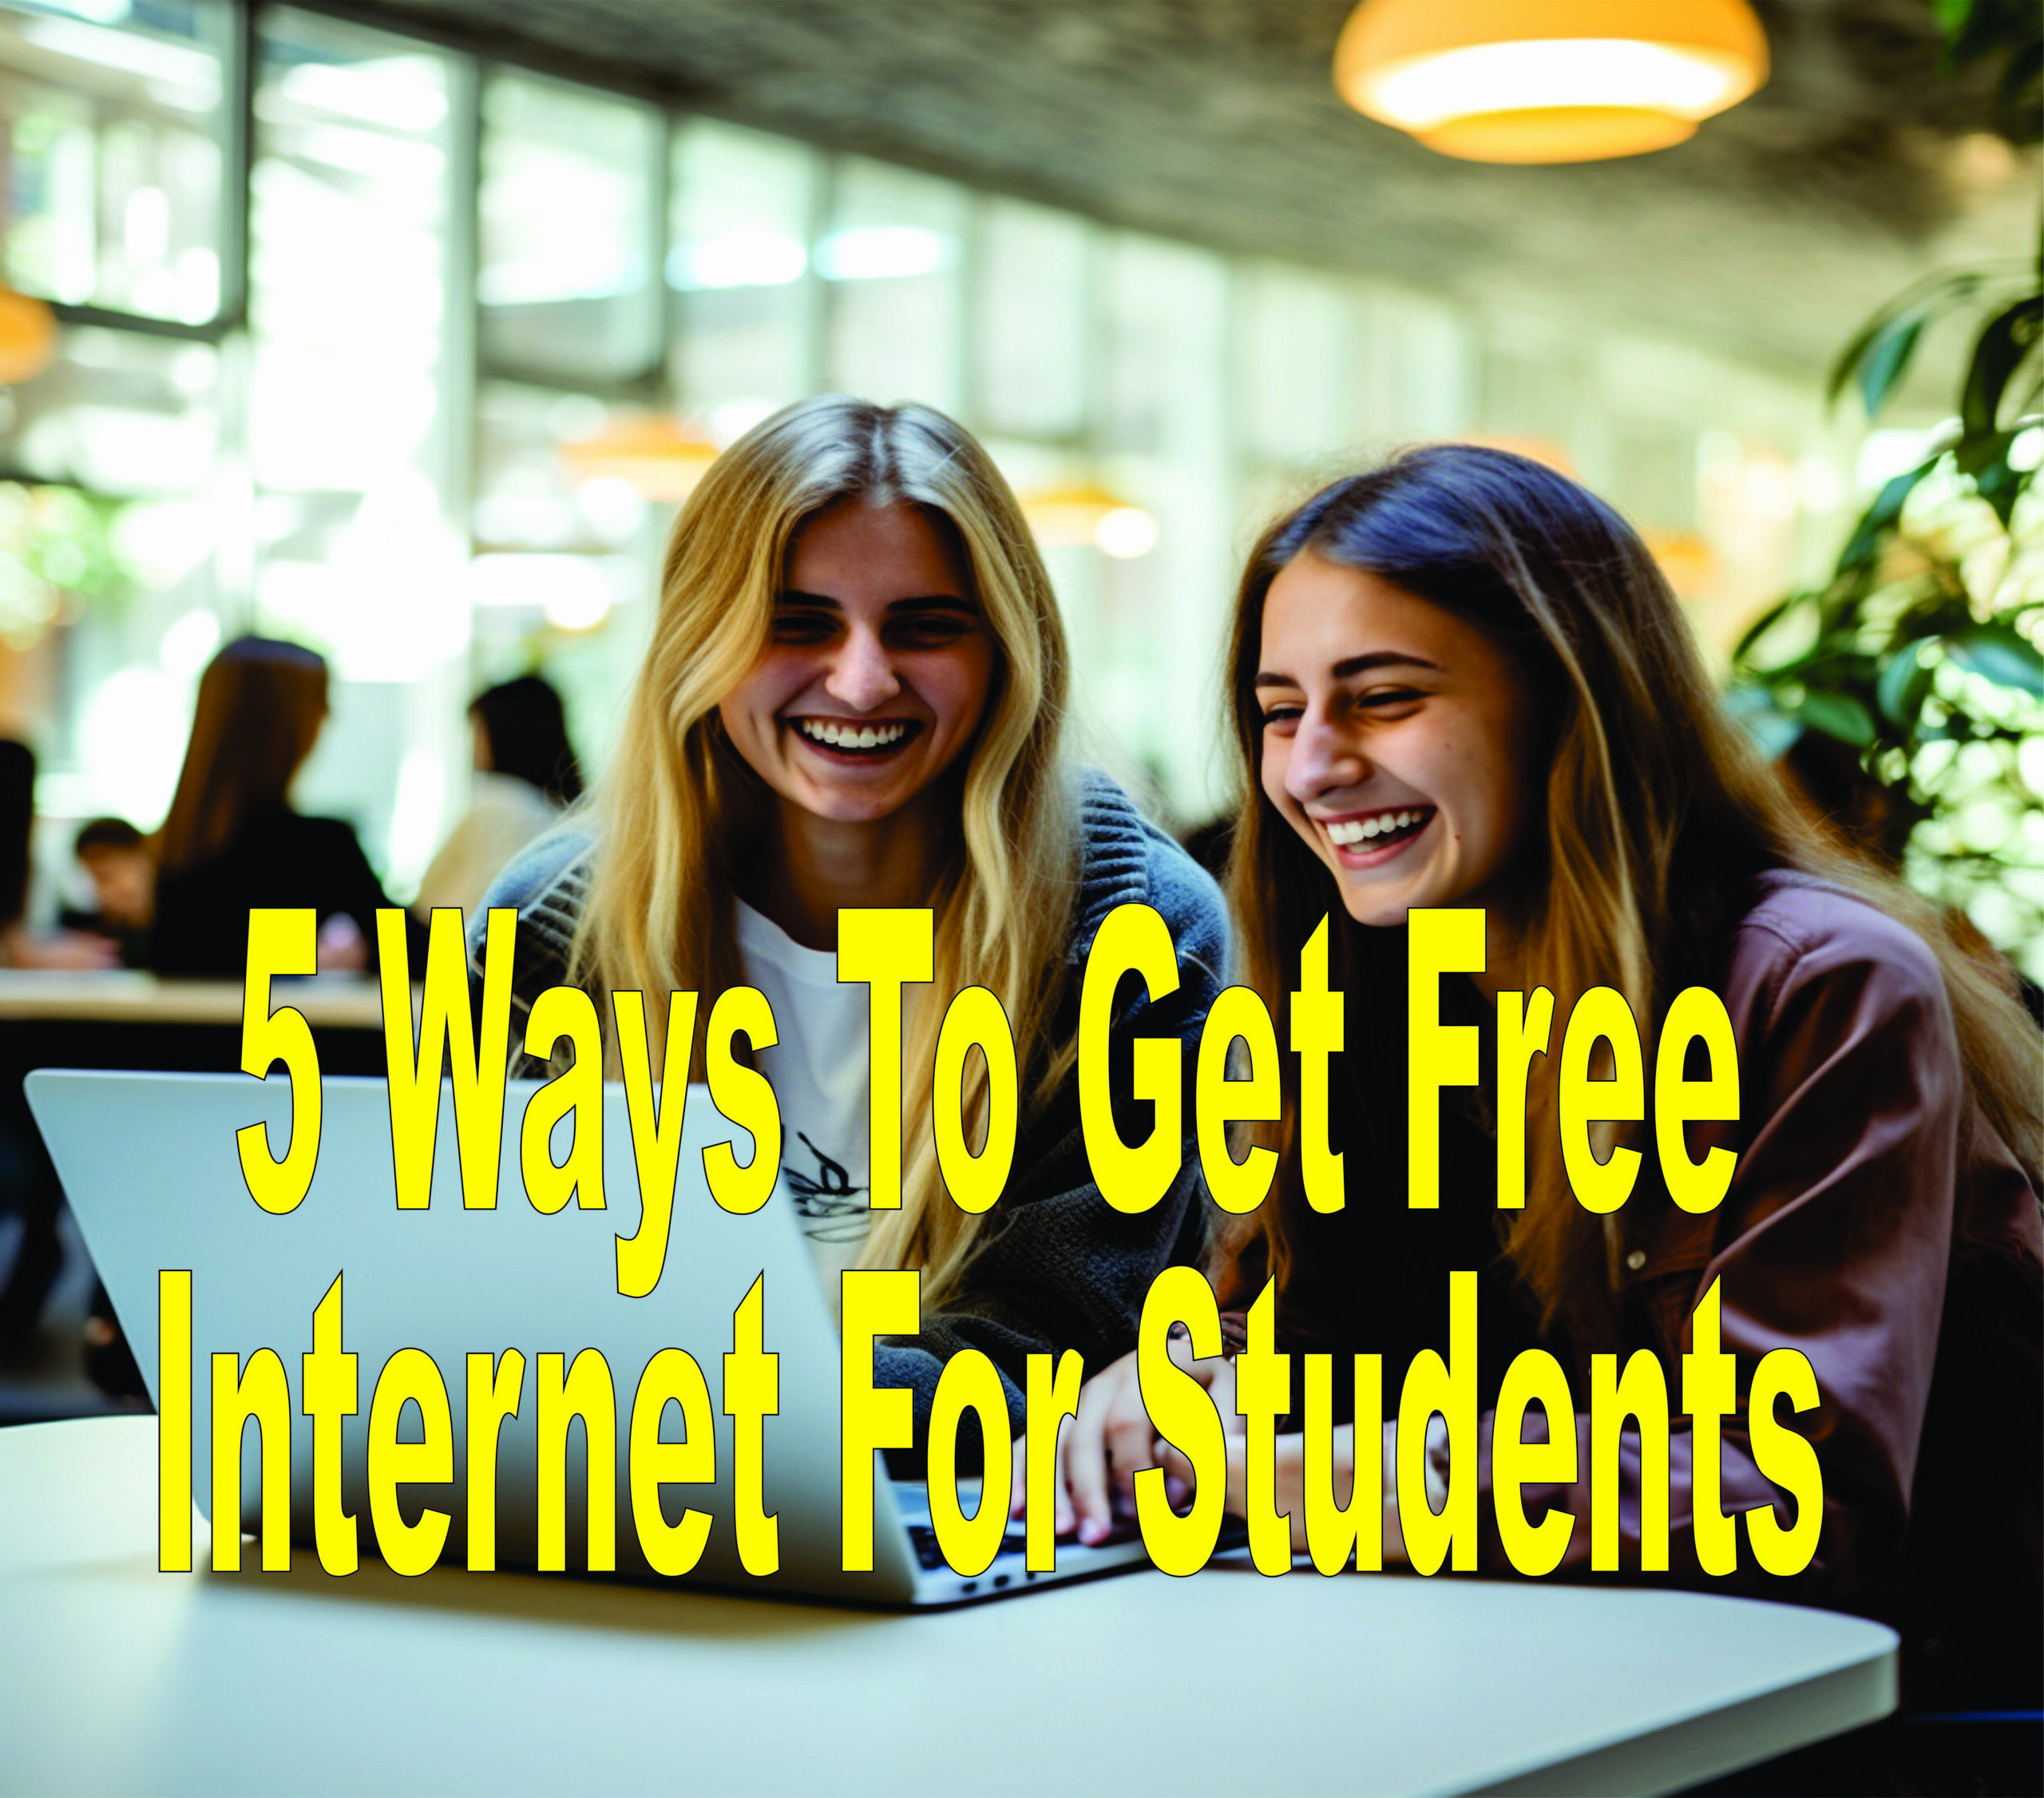 5 Ways To Get Free Internet For Students